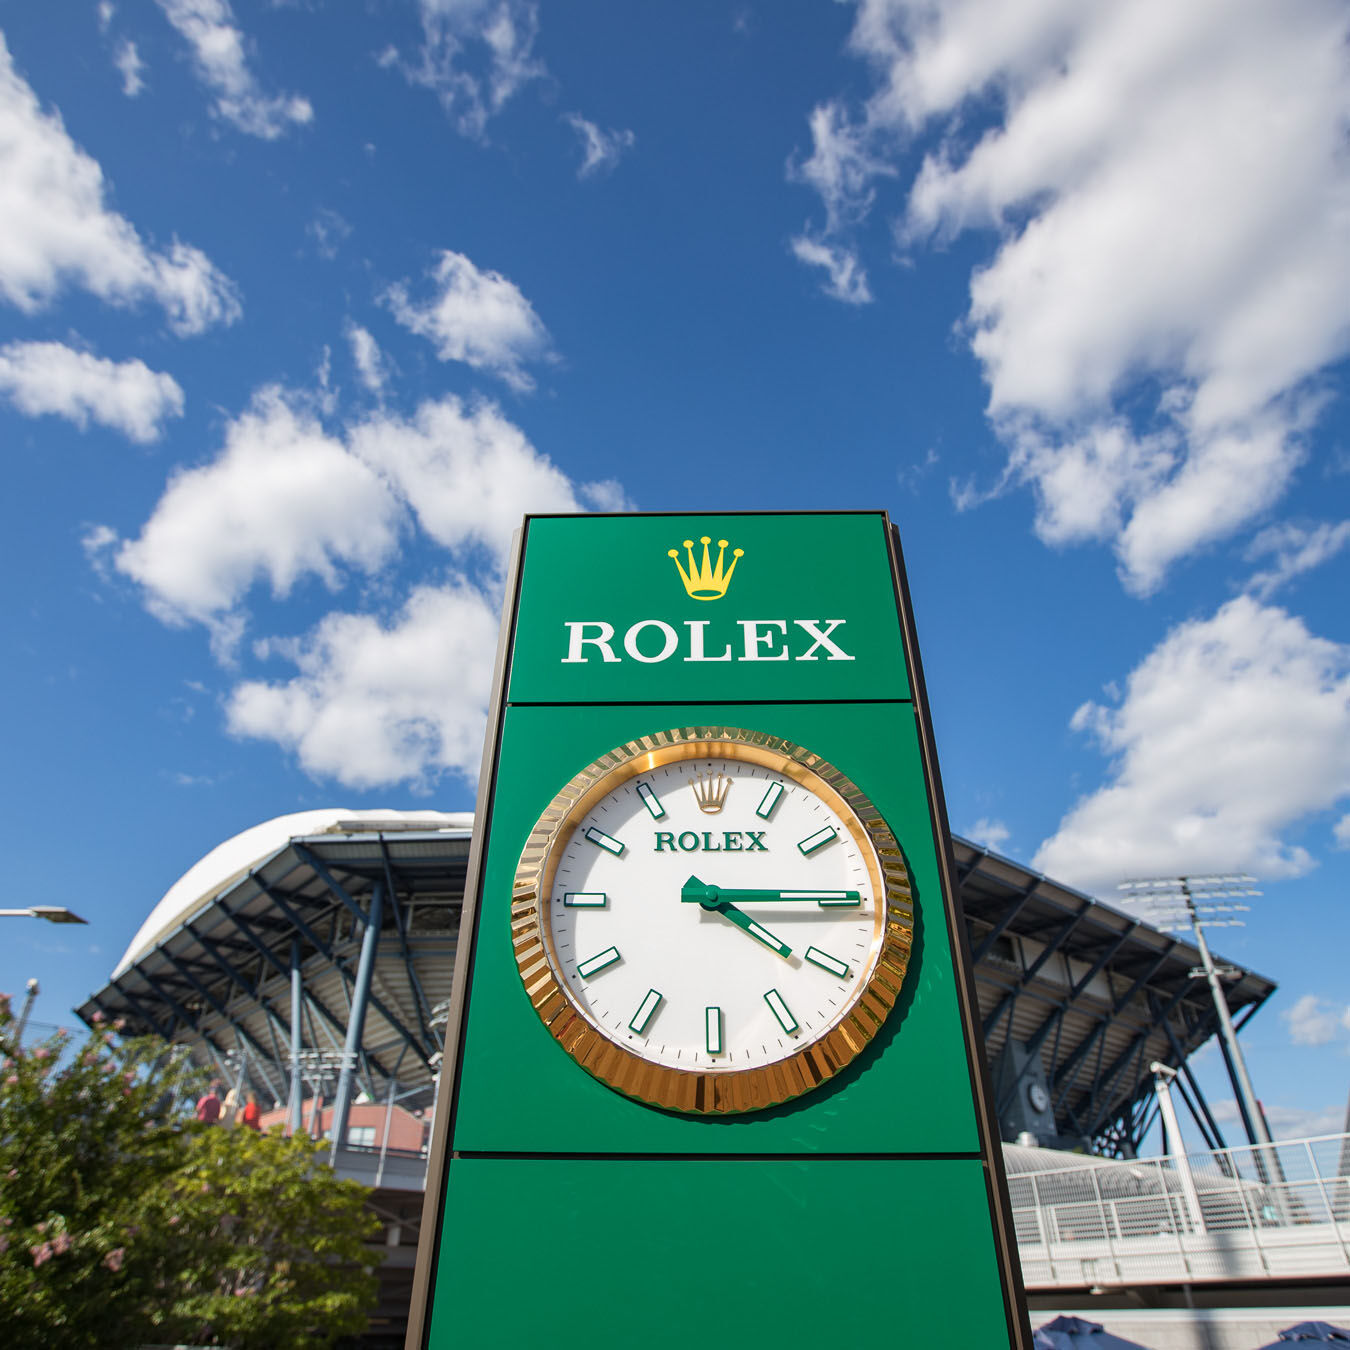 Large Rolex clock signifies the watchmaker's place as official timekeeper of US Open Tennis.